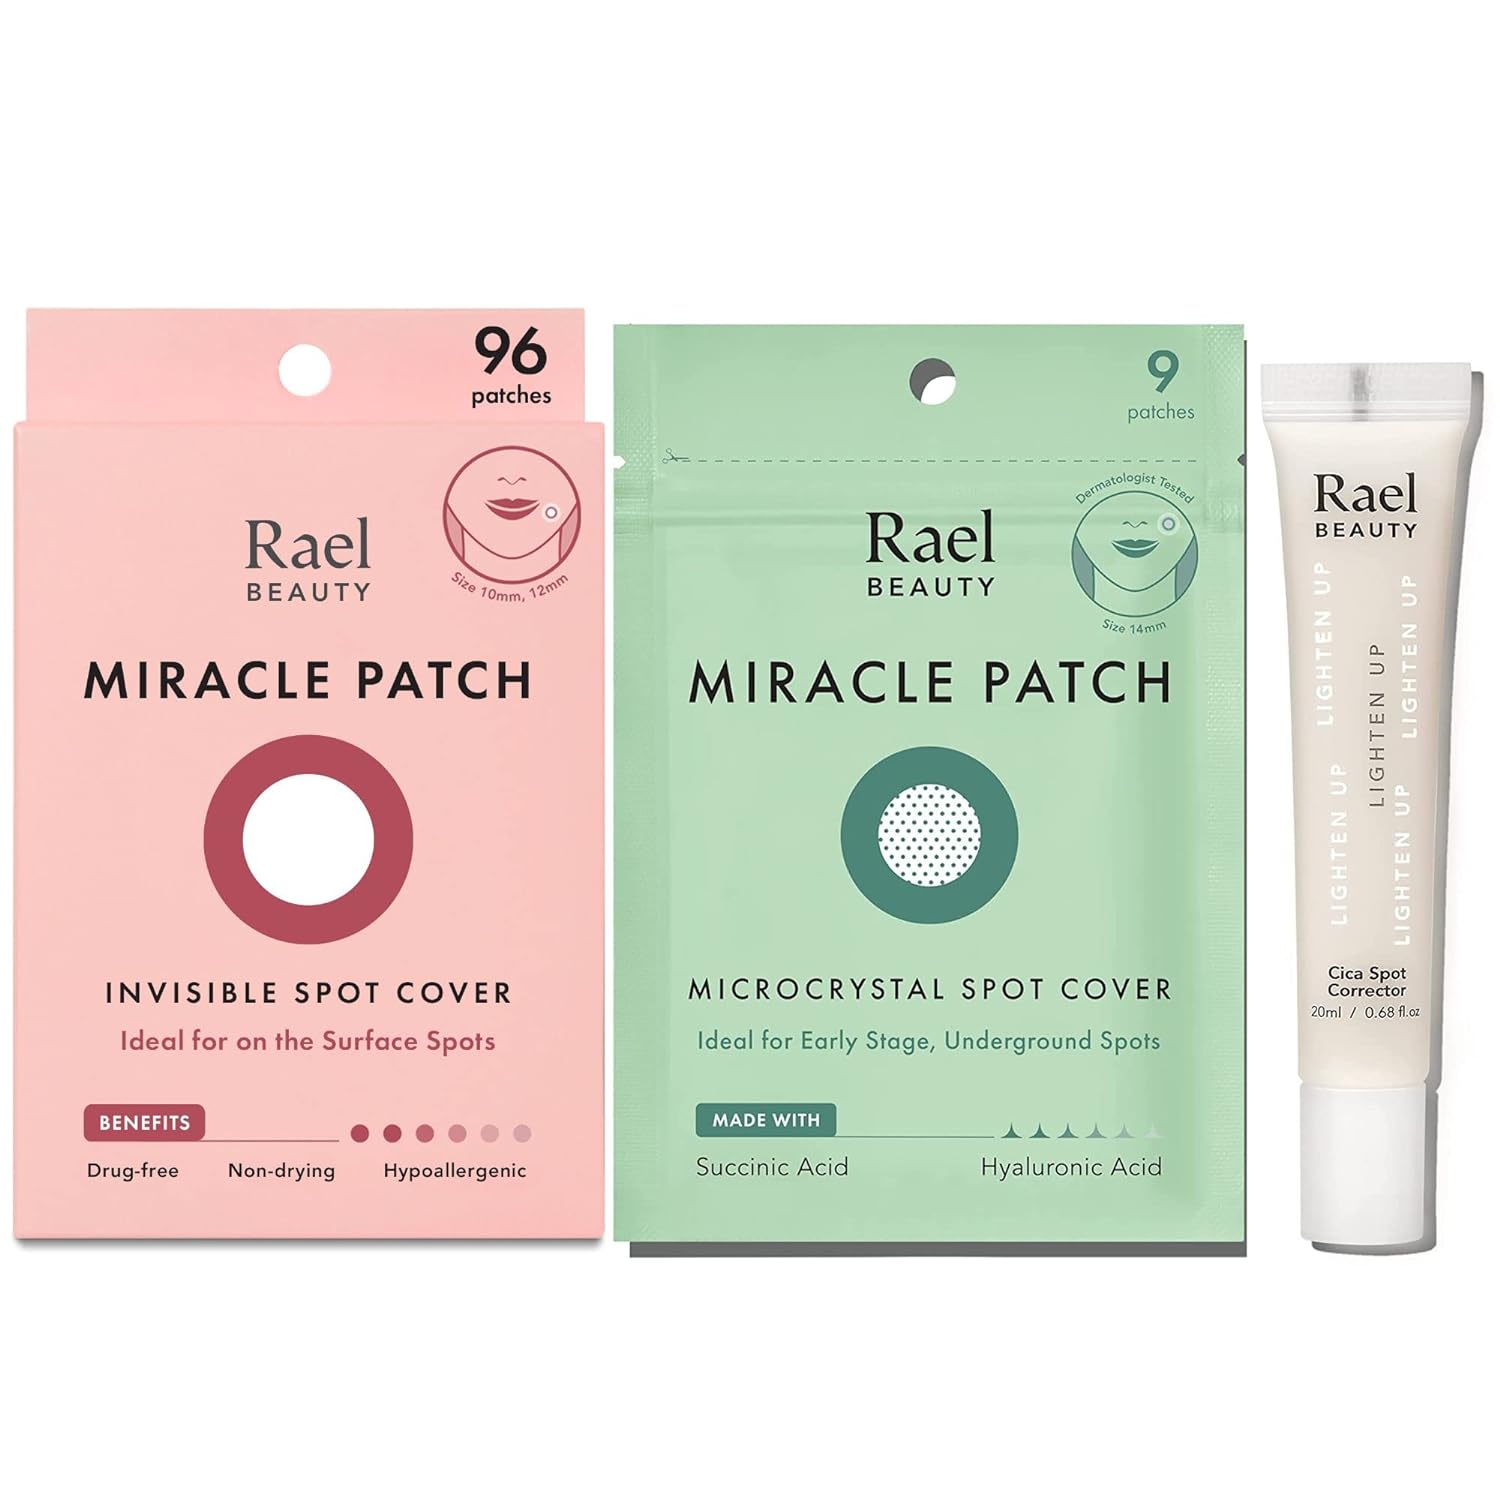 Rael Miracle Bundle - Invisible Spot Cover (96 Count), Microcrystal Spot Cover (9 Count), Cica Dark Spot Cream (20, 0.68)